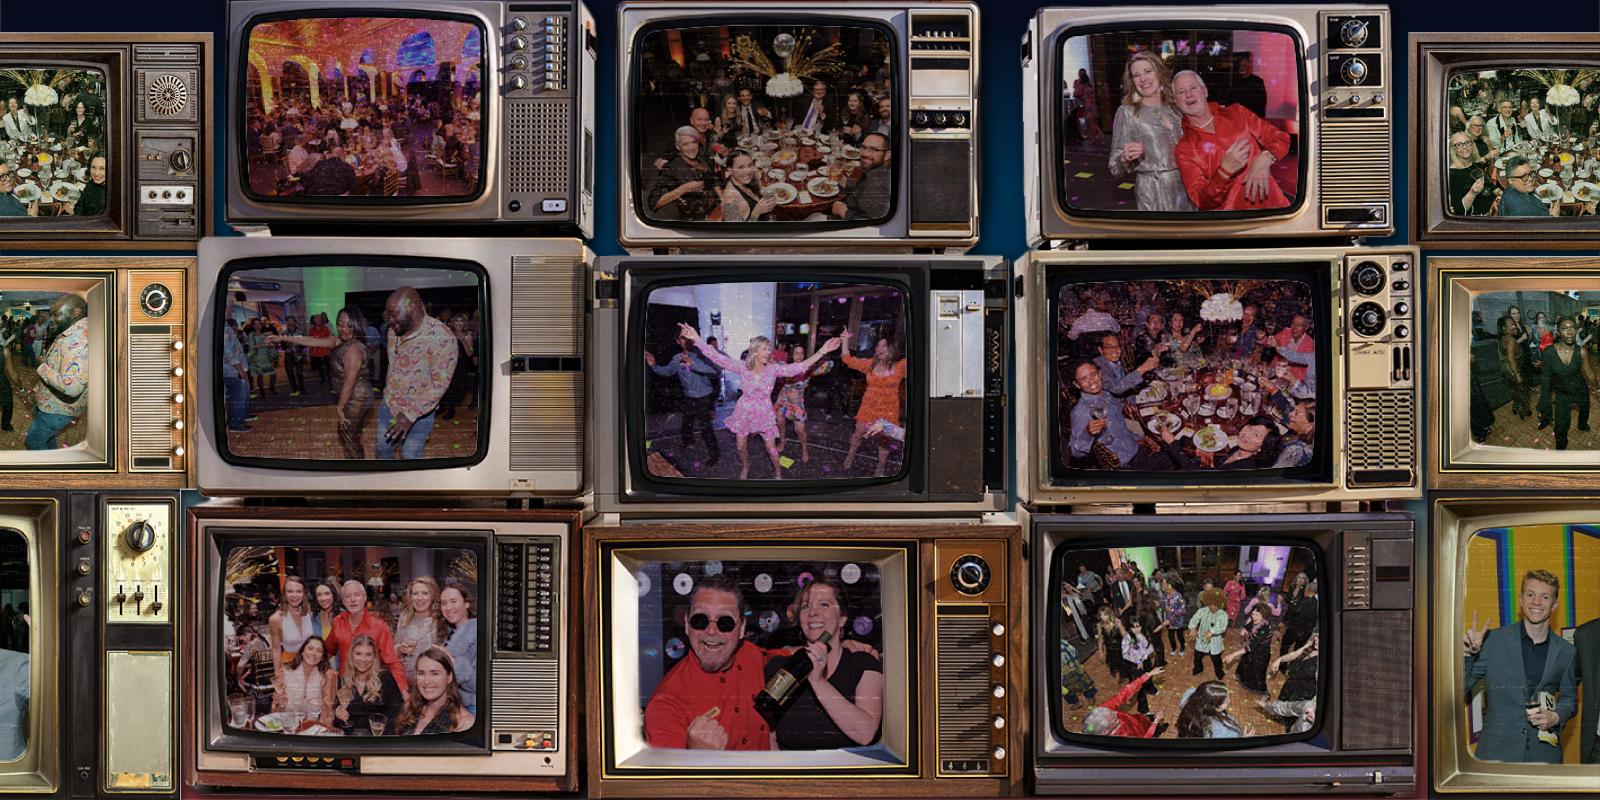 a collection of vintage tvs with images of people celebrating and dancing on the screens